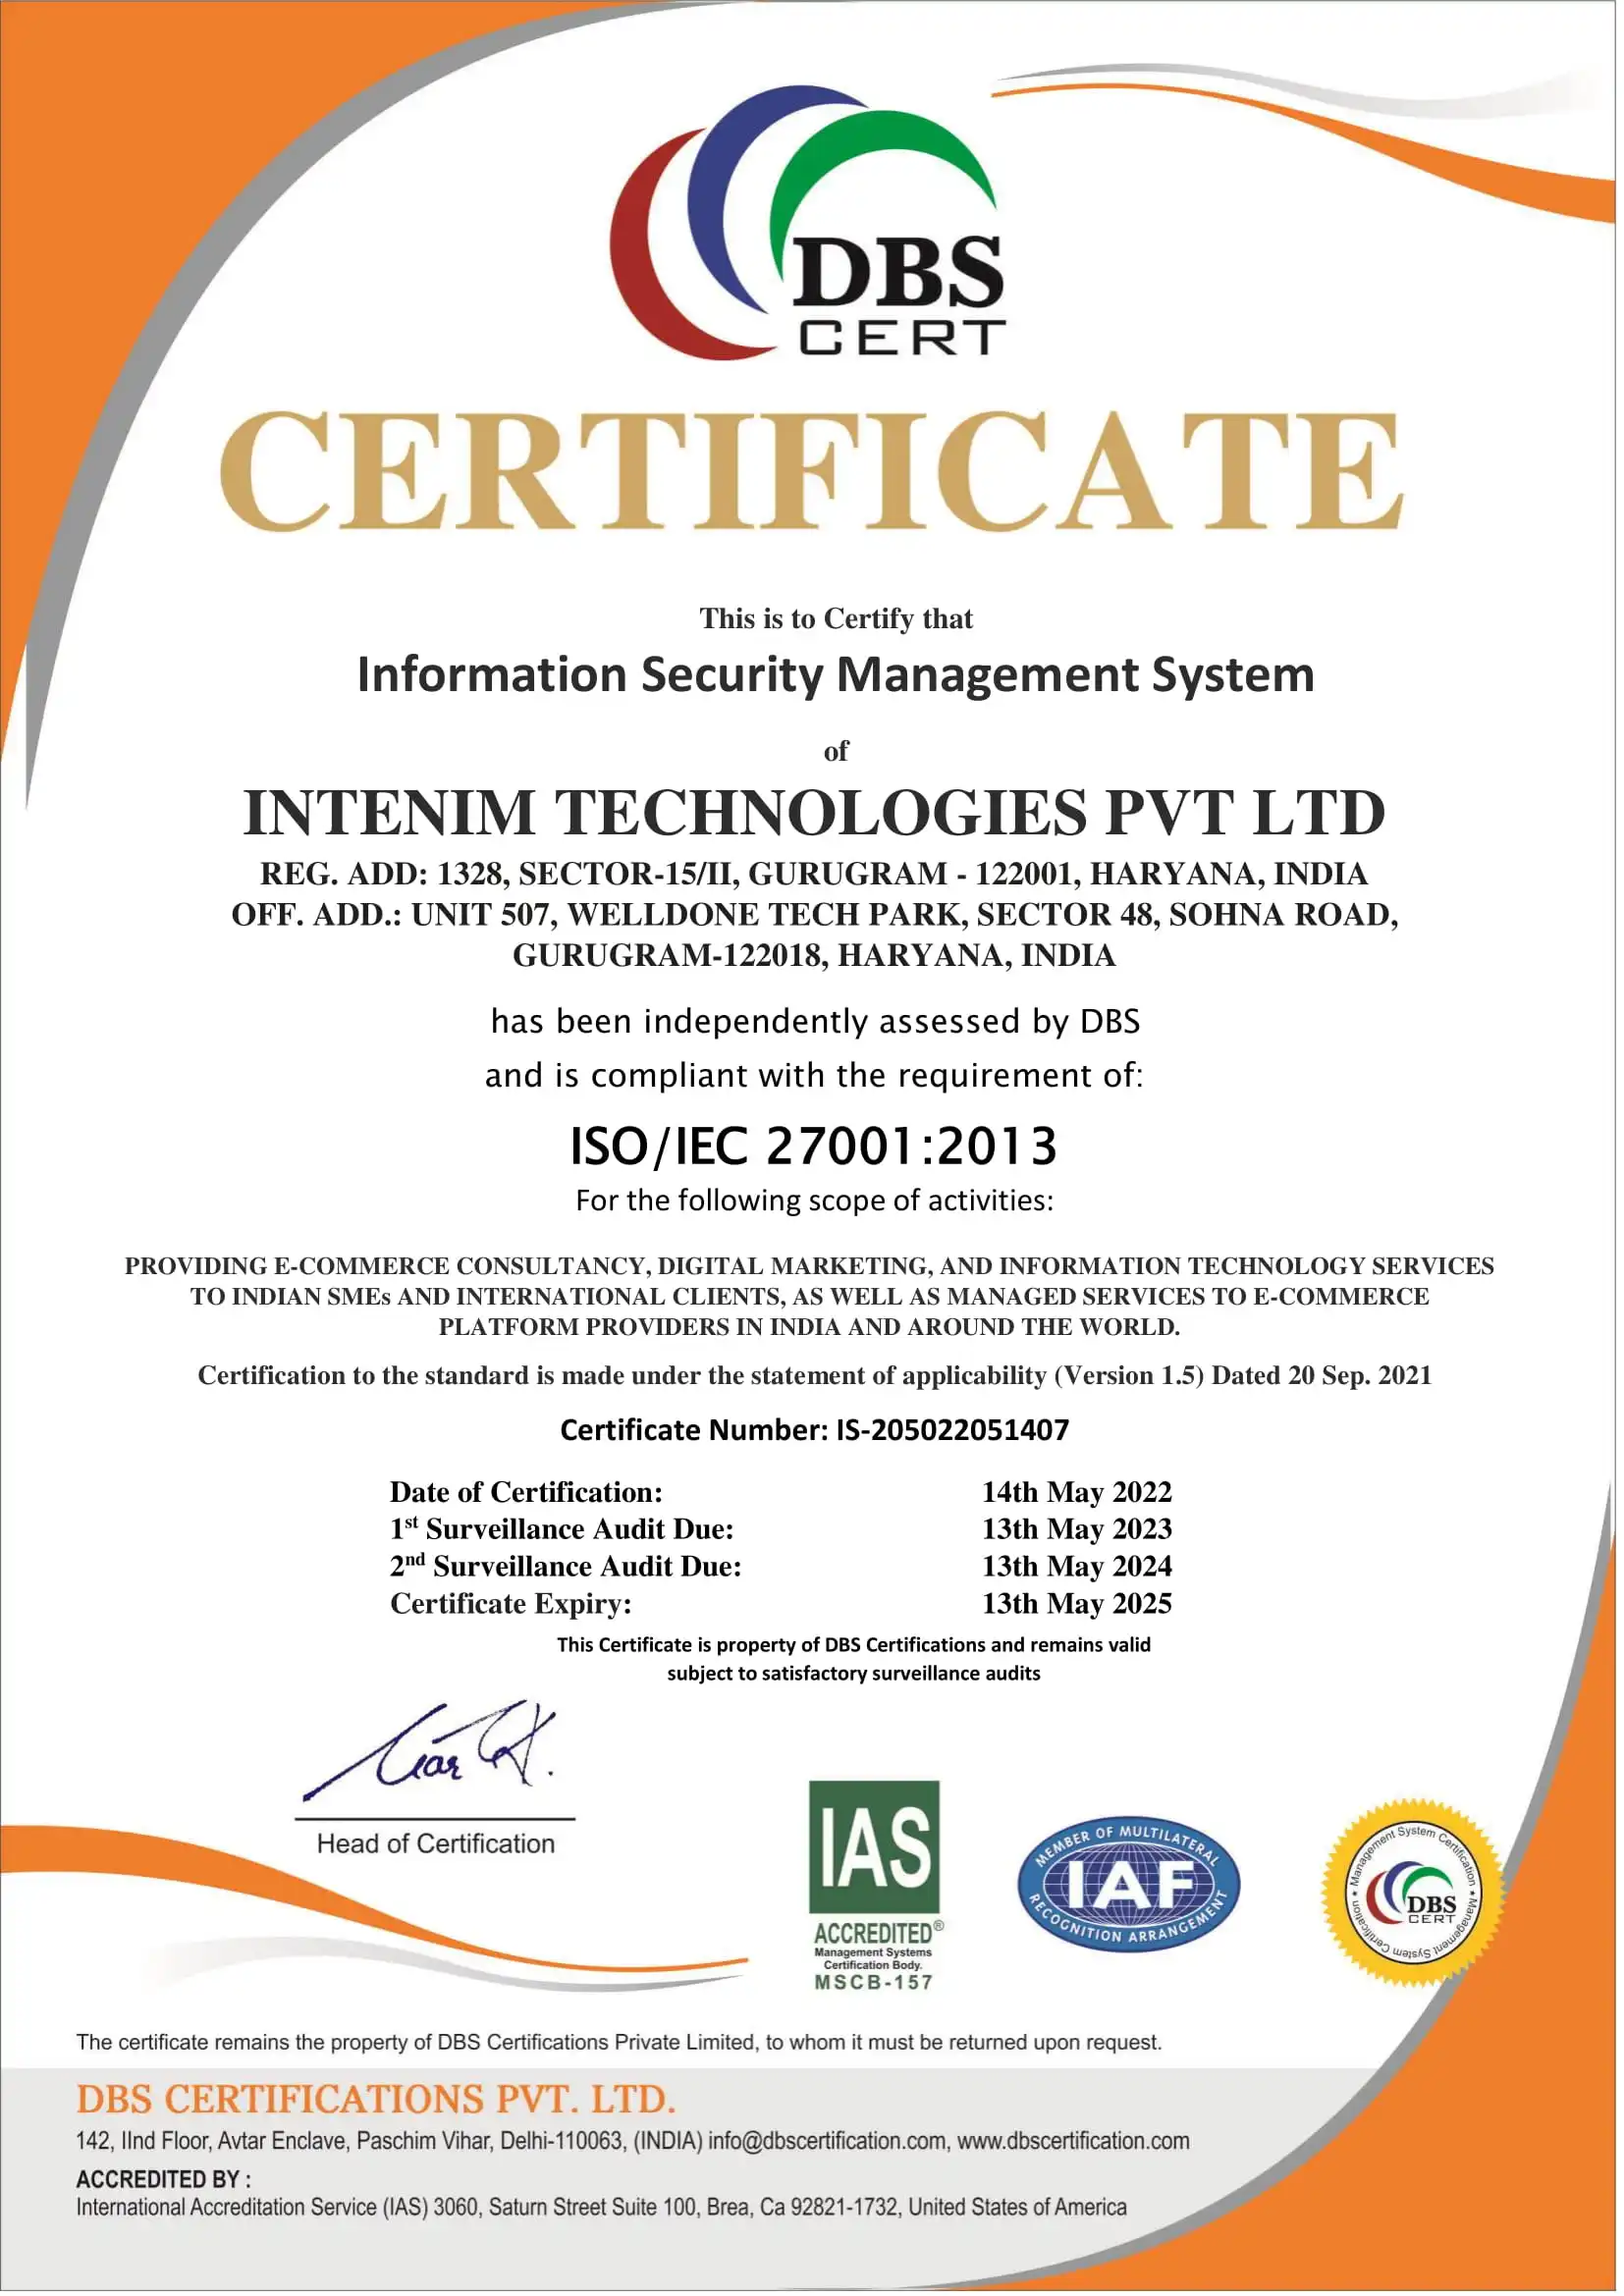 Certificate of Information Security Management System